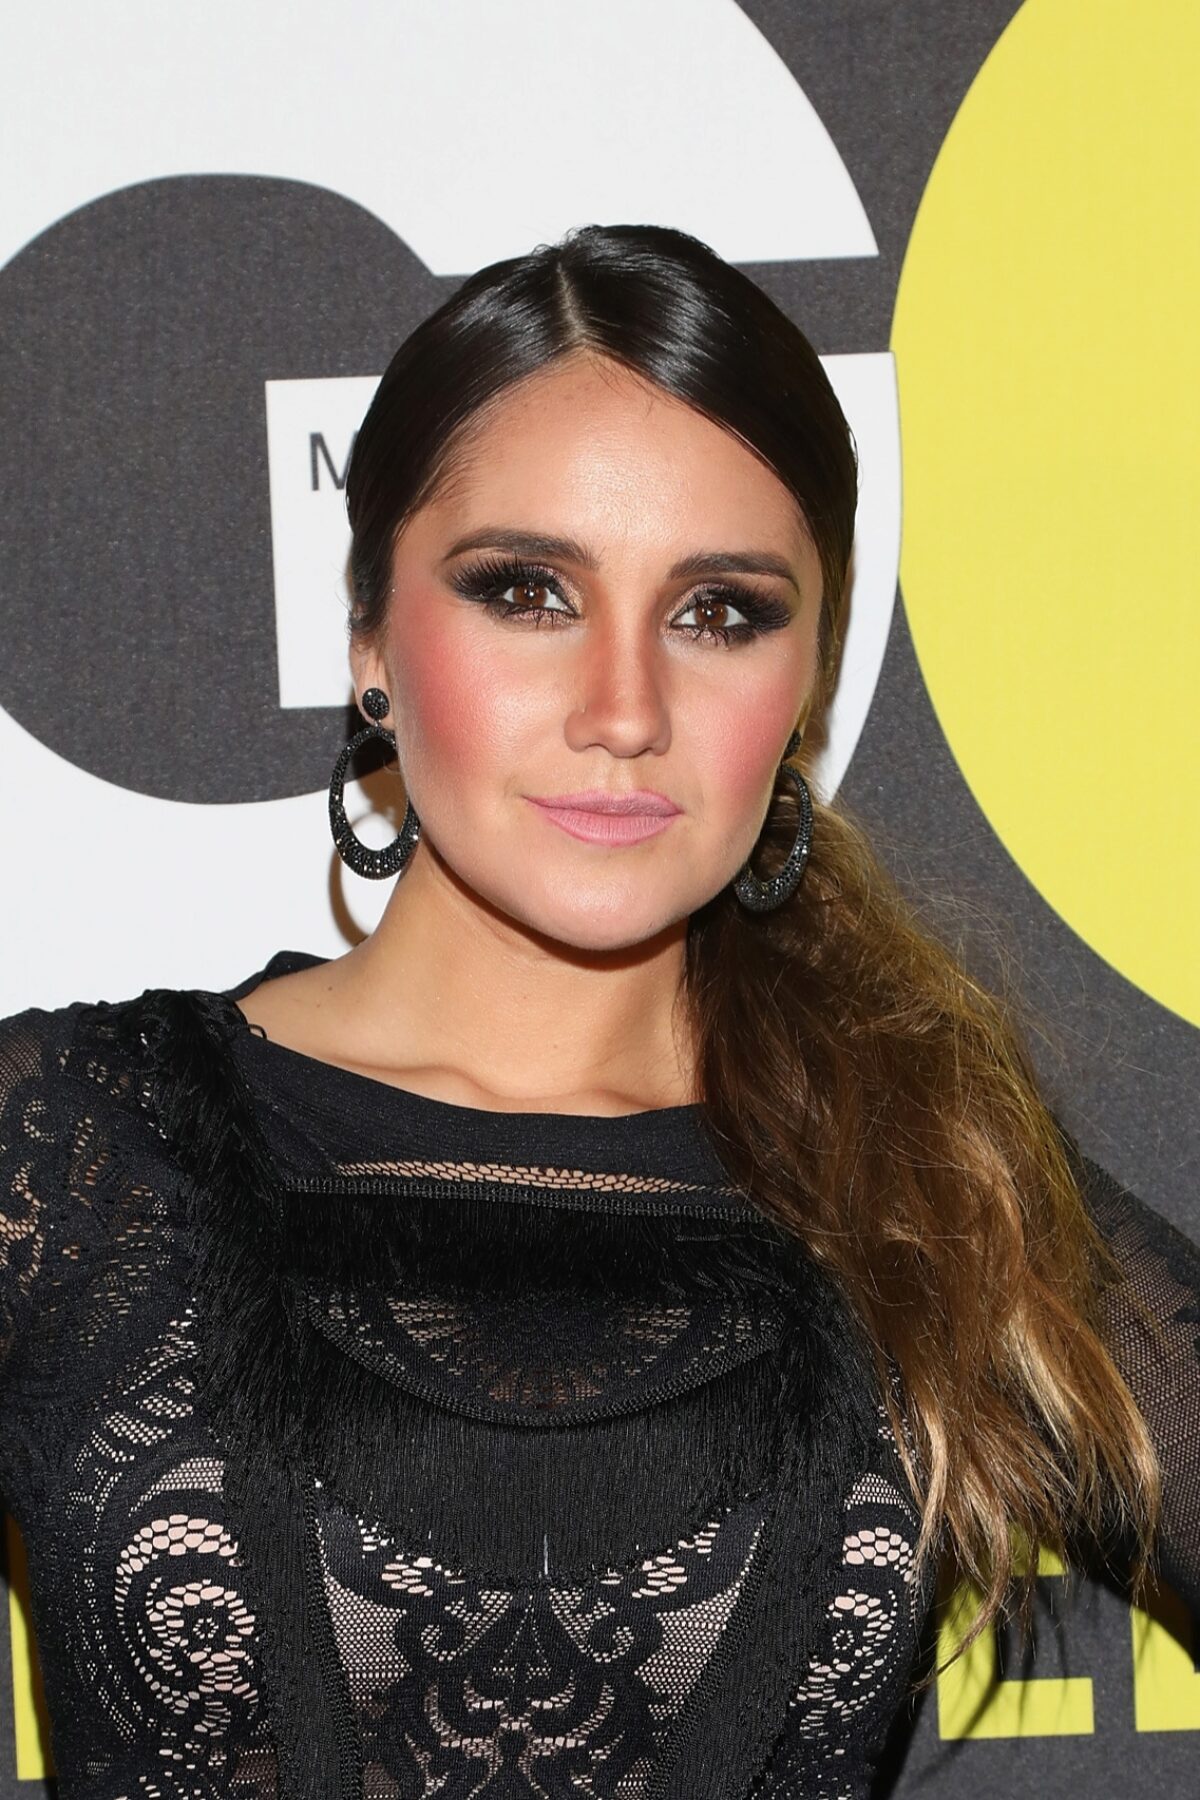 MEXICO CITY, MEXICO - OCTOBER 31: Dulce Maria attends GQ Mexico Men of the Year Awards 2018 at Centro Cultural Roberto Cantoral on October 31, 2018 in Mexico City, Mexico. (Photo by Victor Chavez/Getty Images)